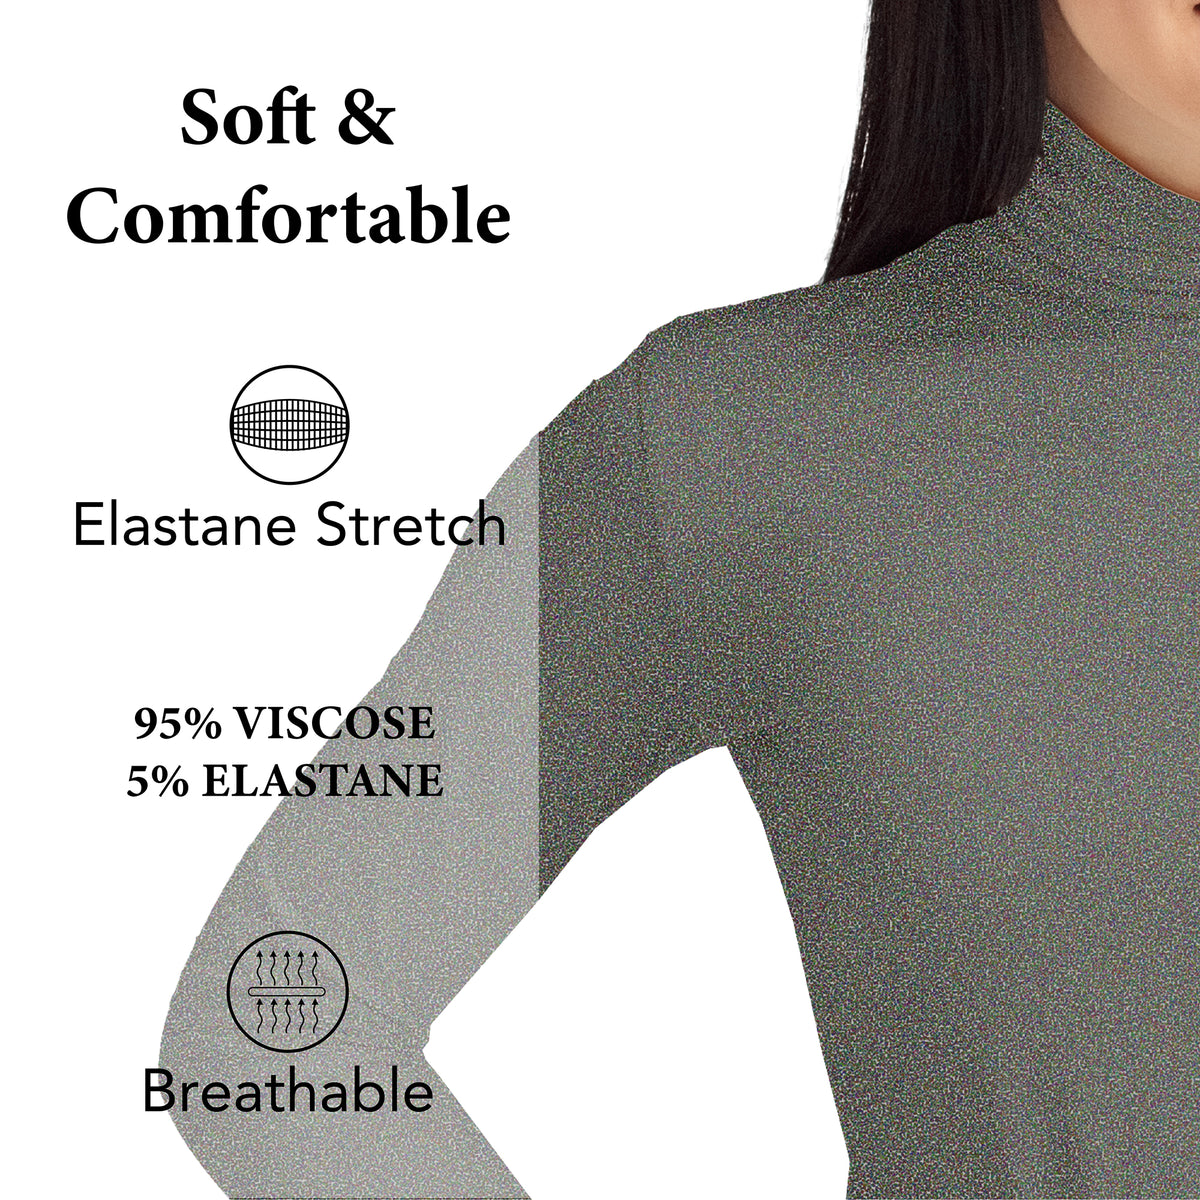 Ladies Long Sleeve Polo Neck Top Charcoal